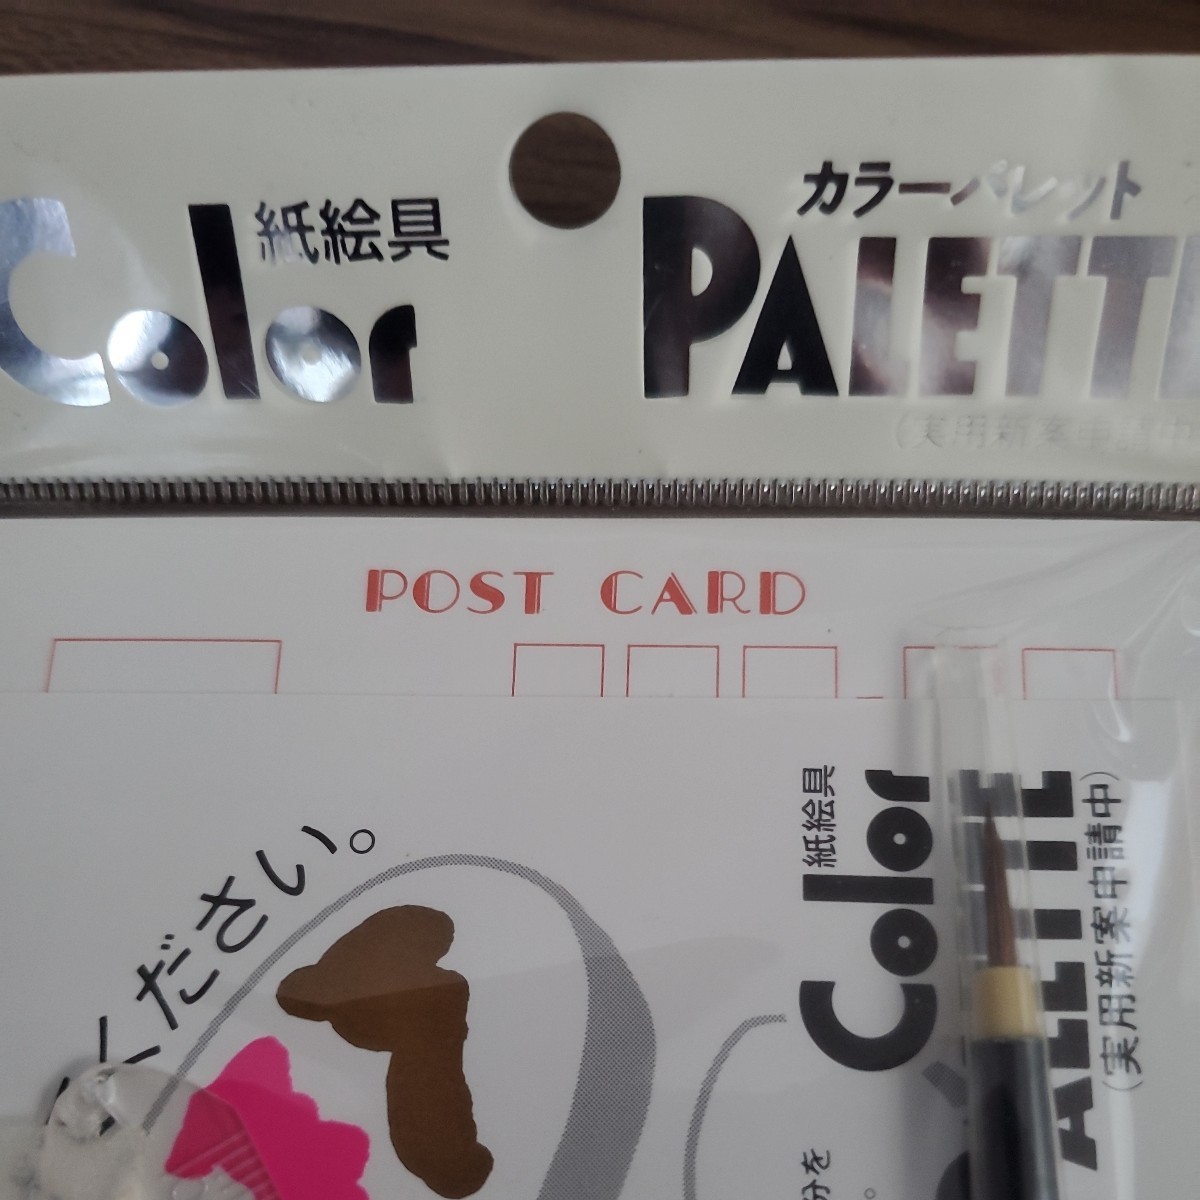  paper coloring material color Palette new goods unused ( postcard 3 sheets * paper coloring material 1 seat * writing brush 1 pcs )